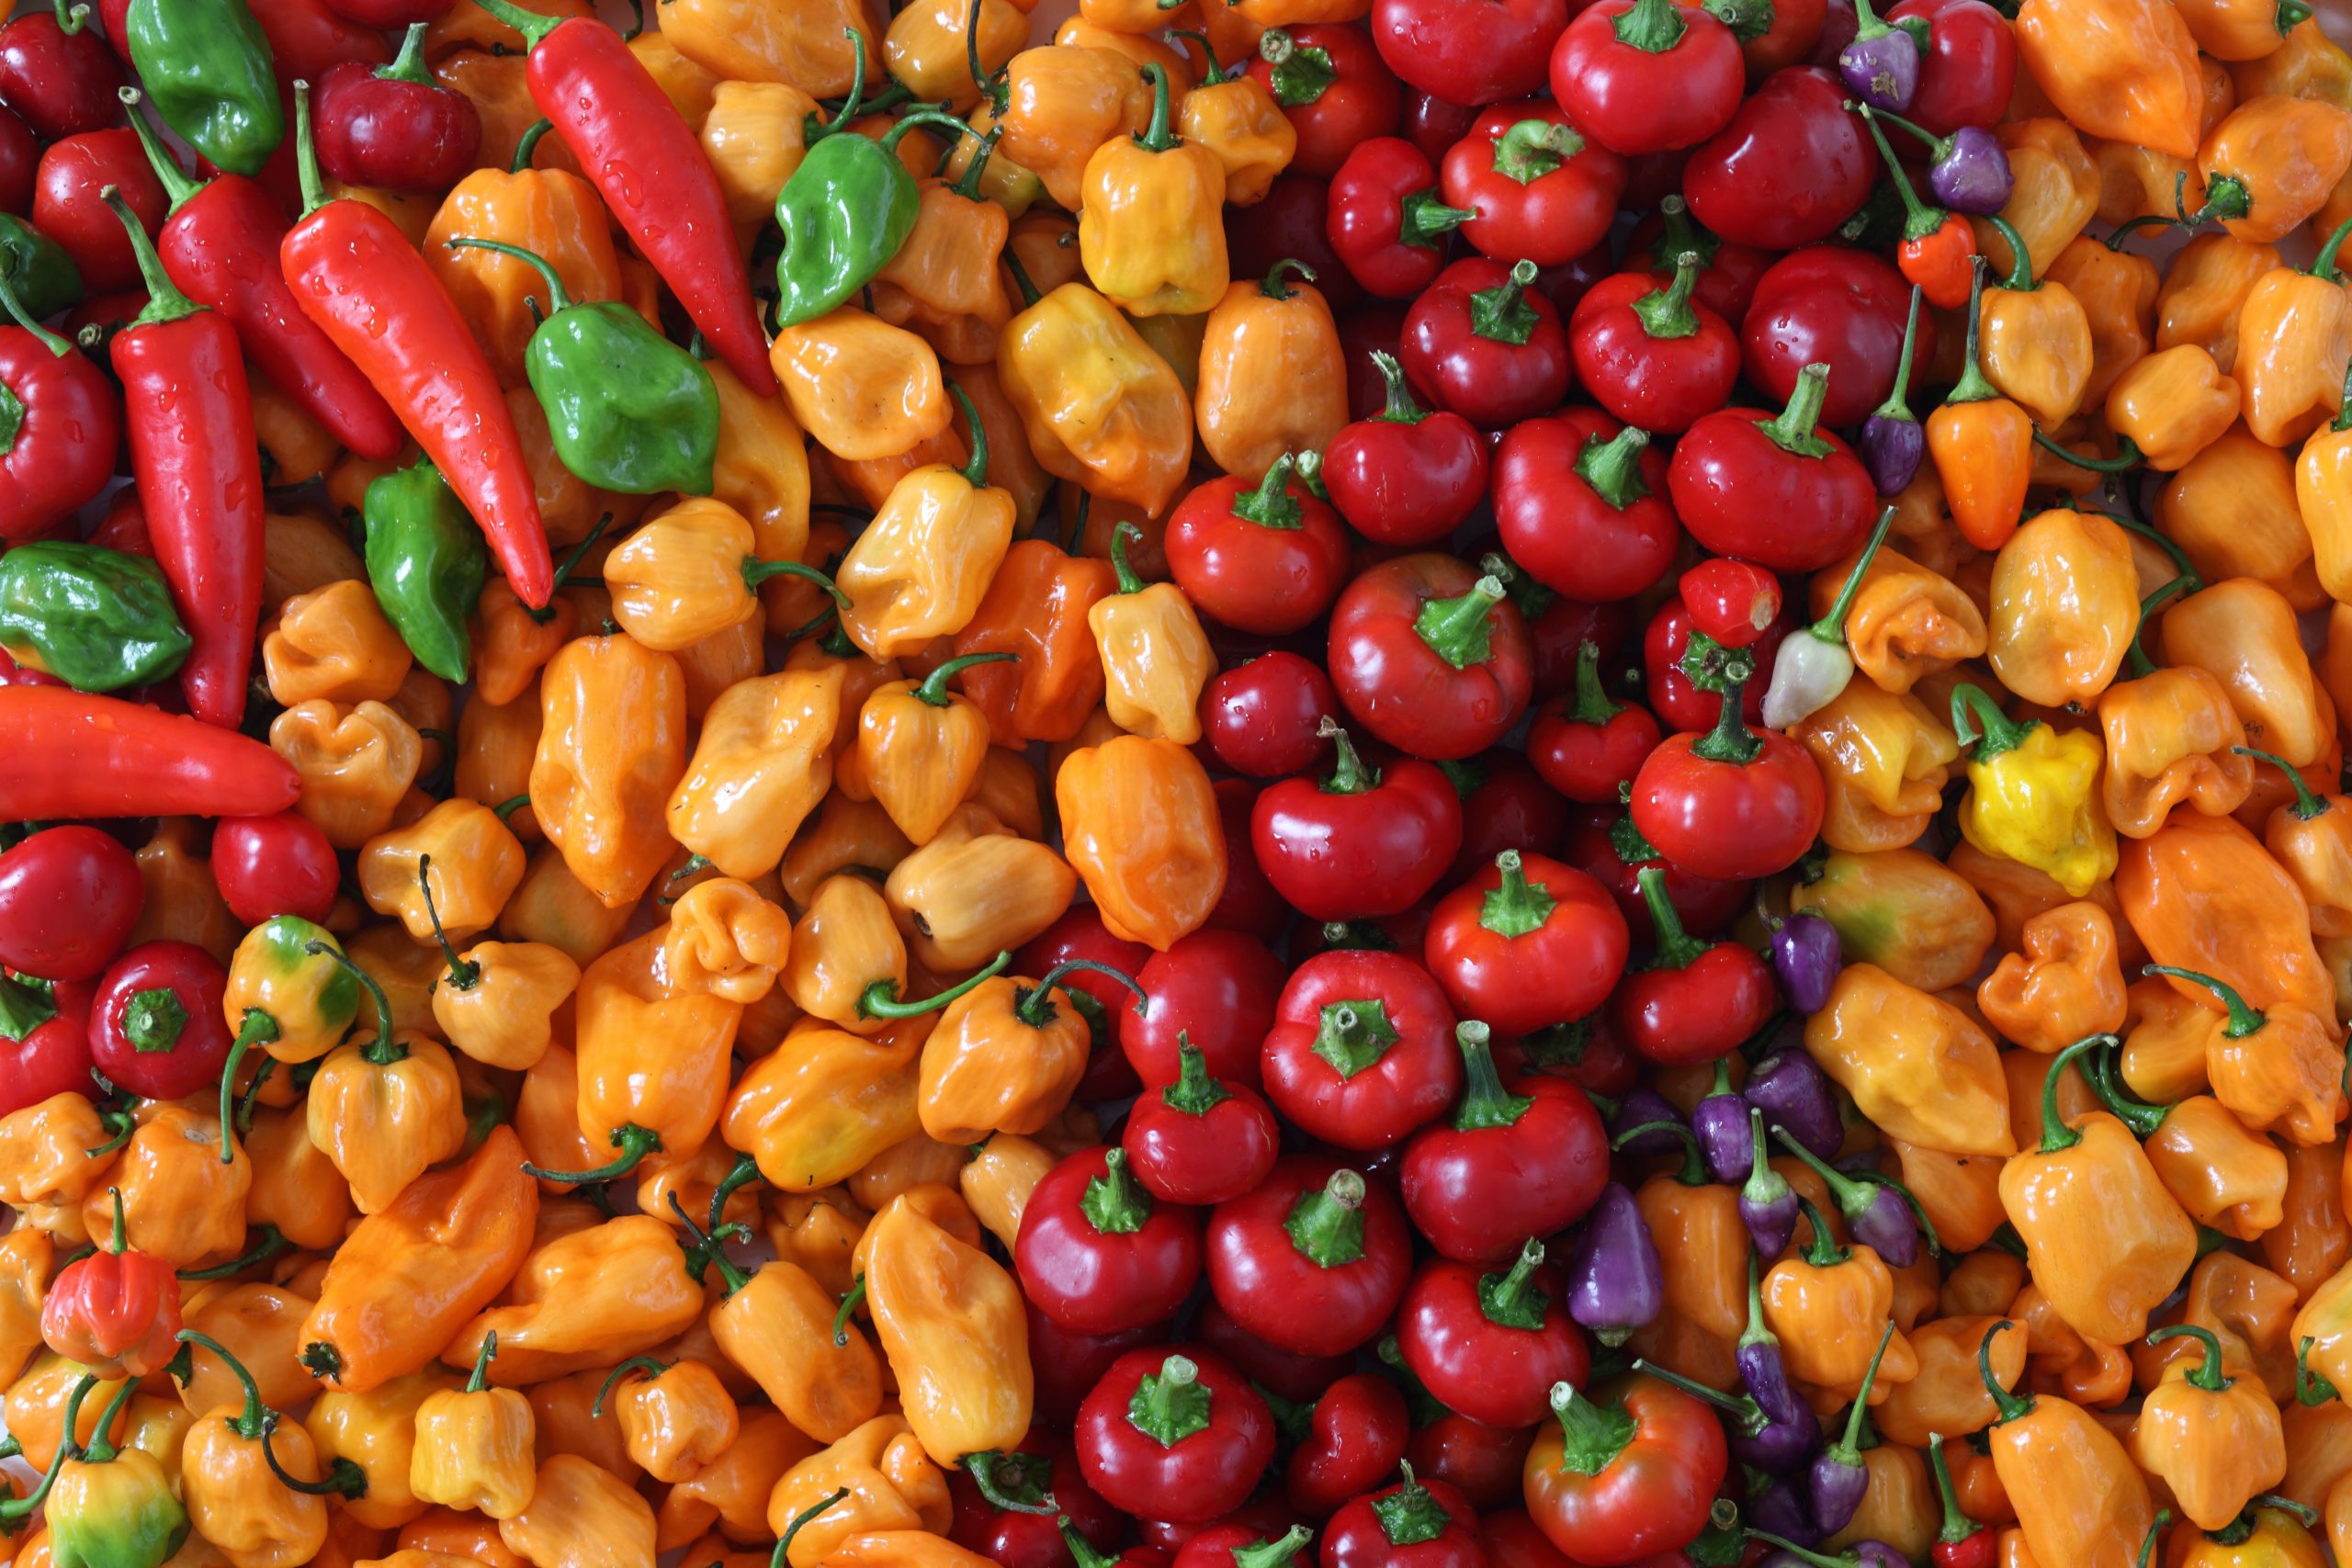 What Makes Red Peppers so Good for You?